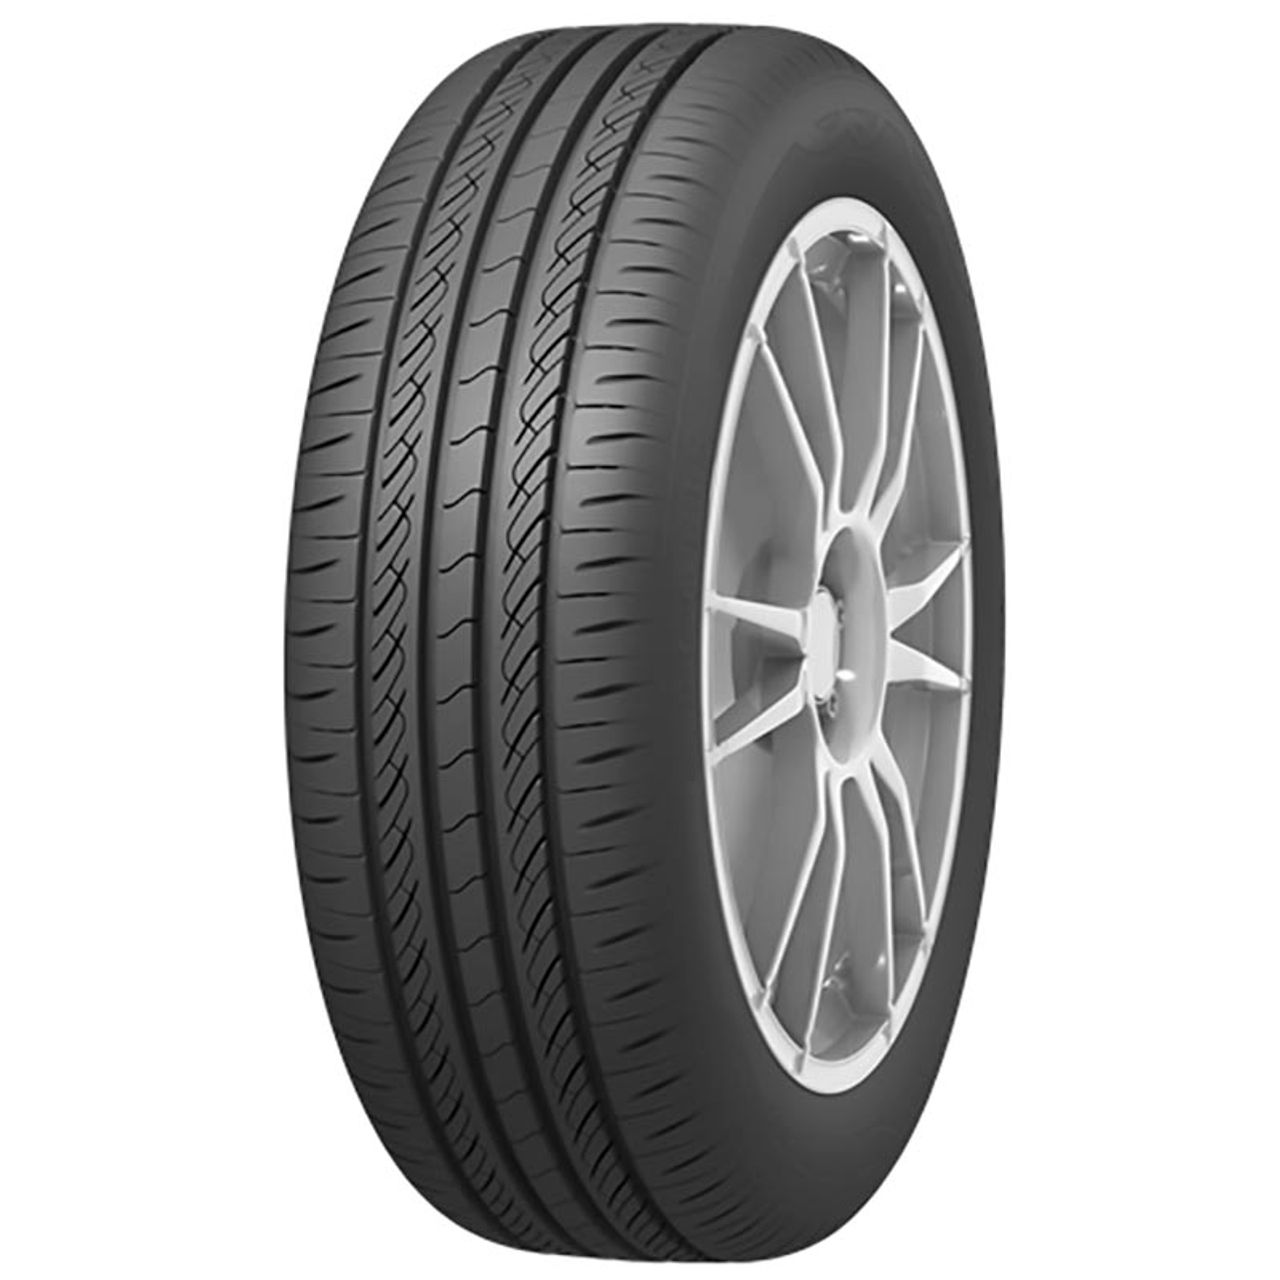 INFINITY ECOSIS 195/50R16 88V BSW